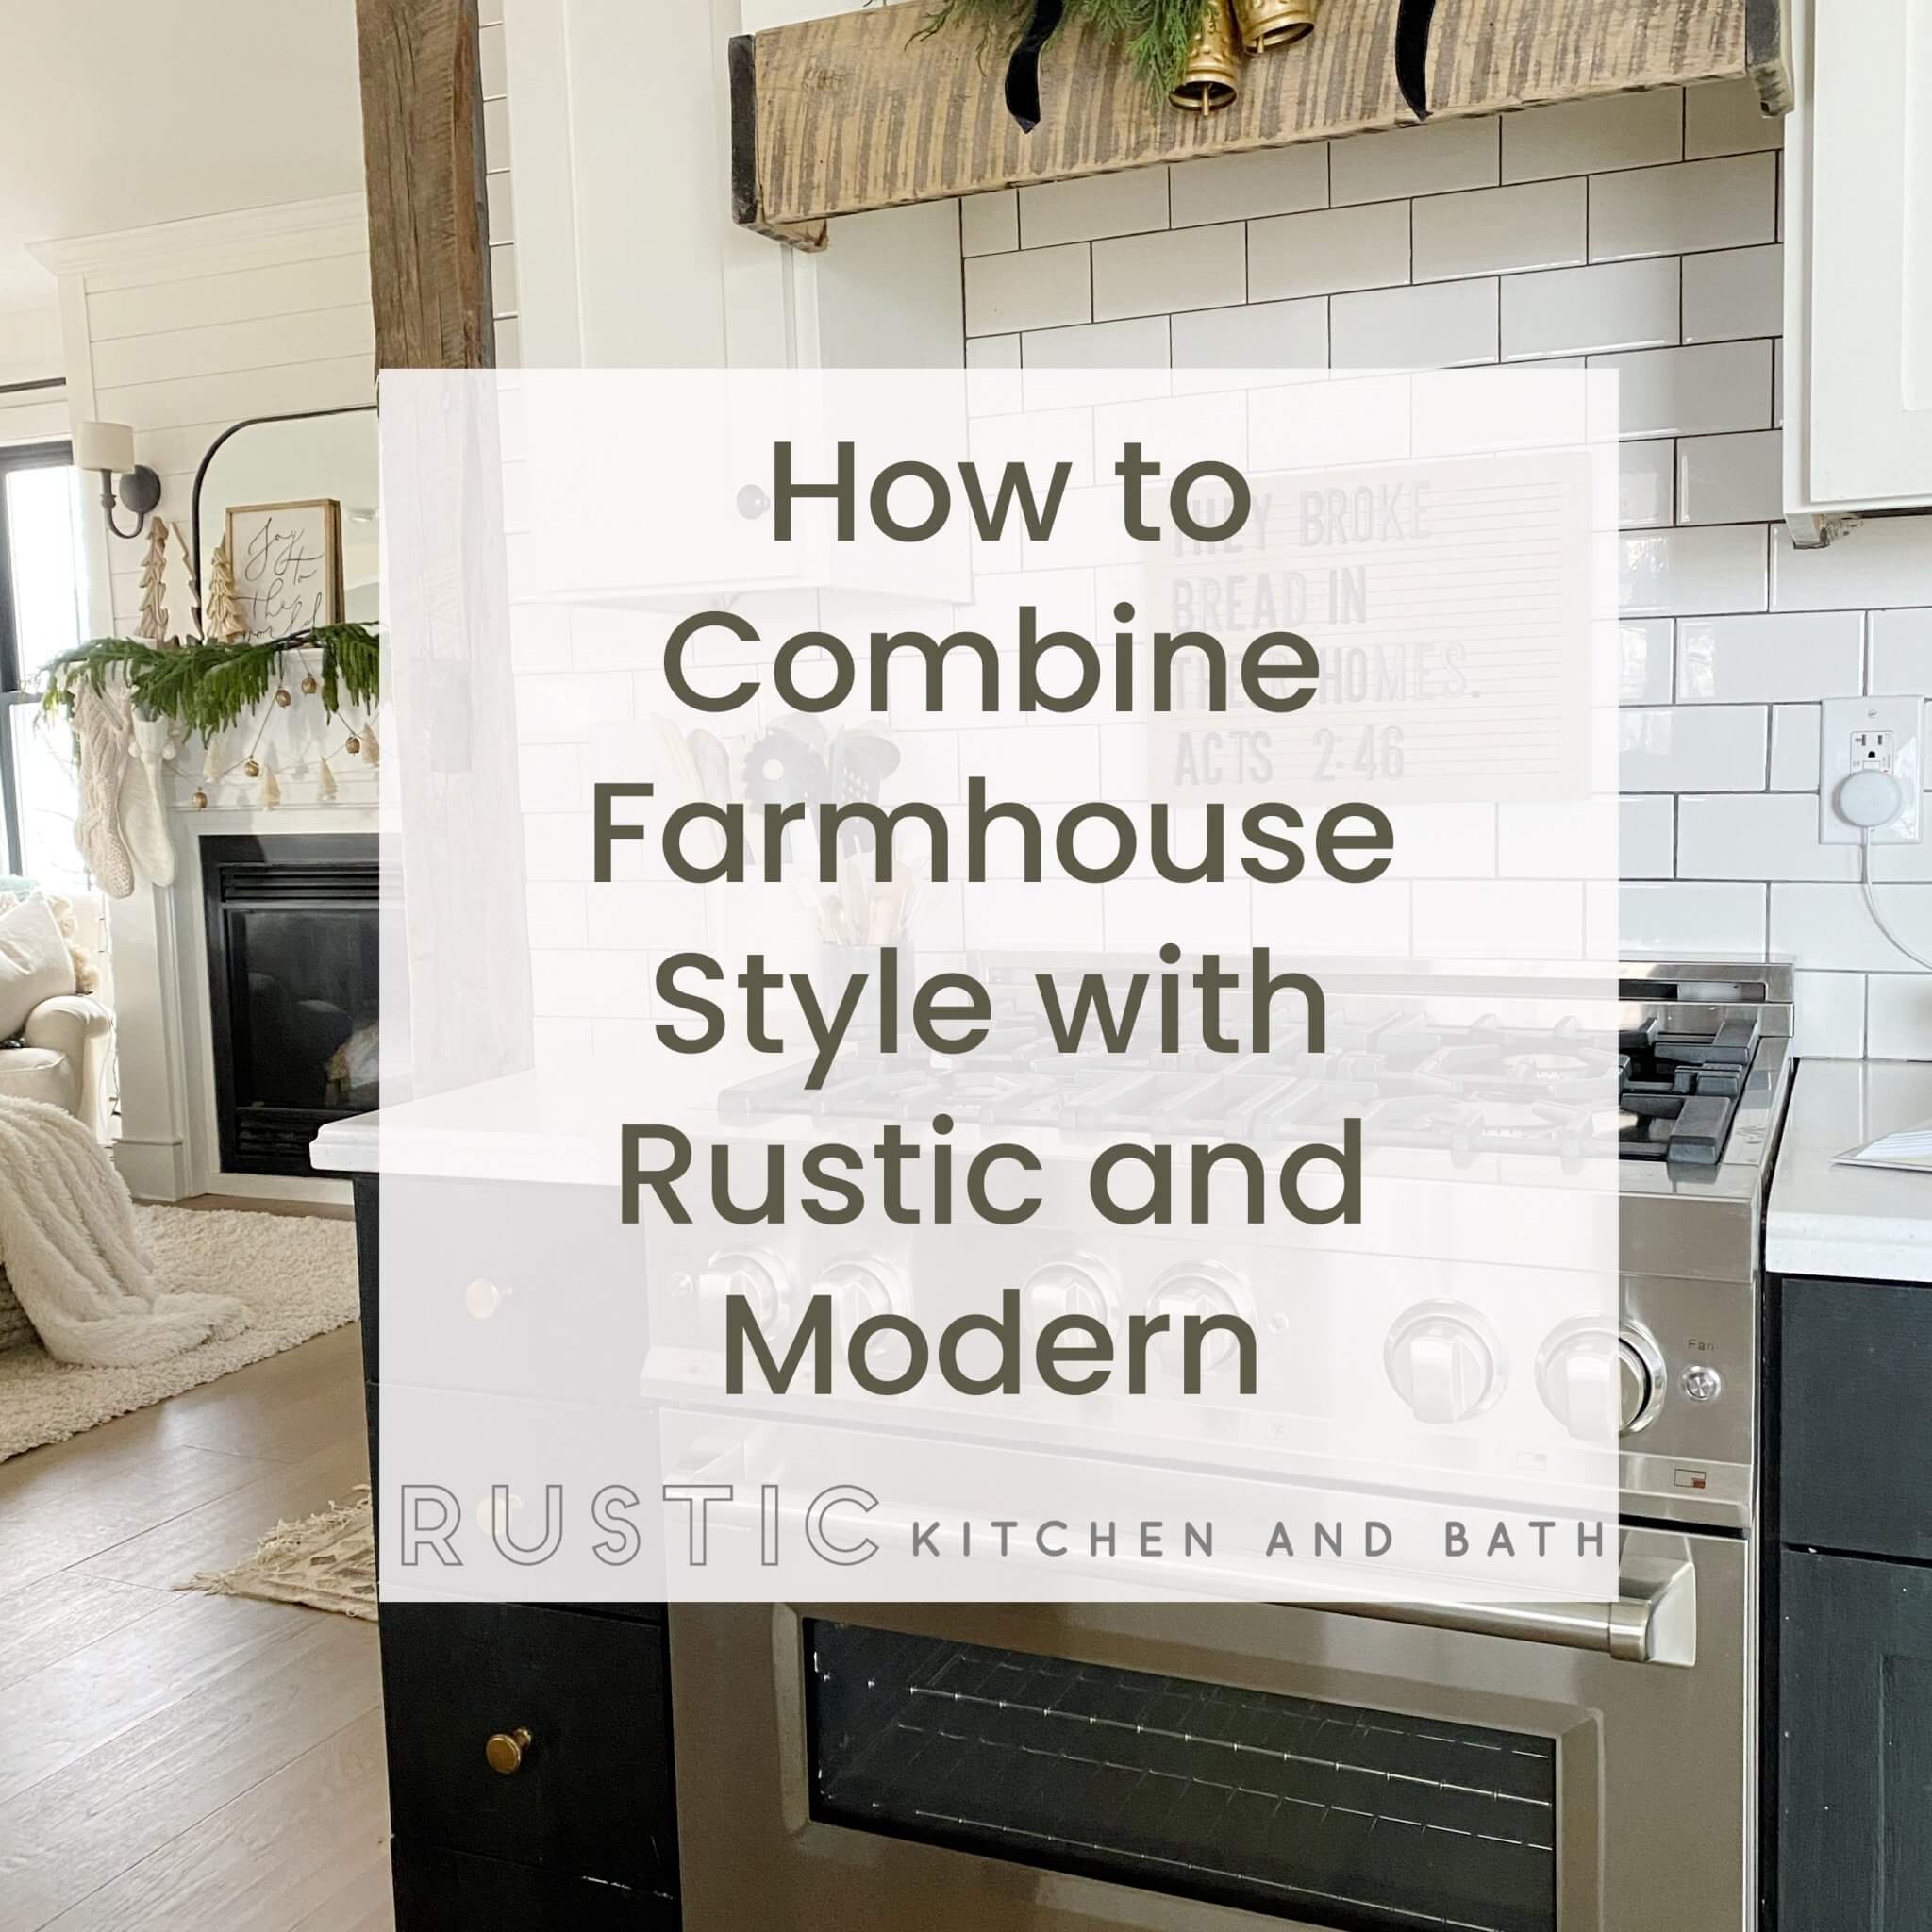 How to Combine Farmhouse Style with Rustic and Modern